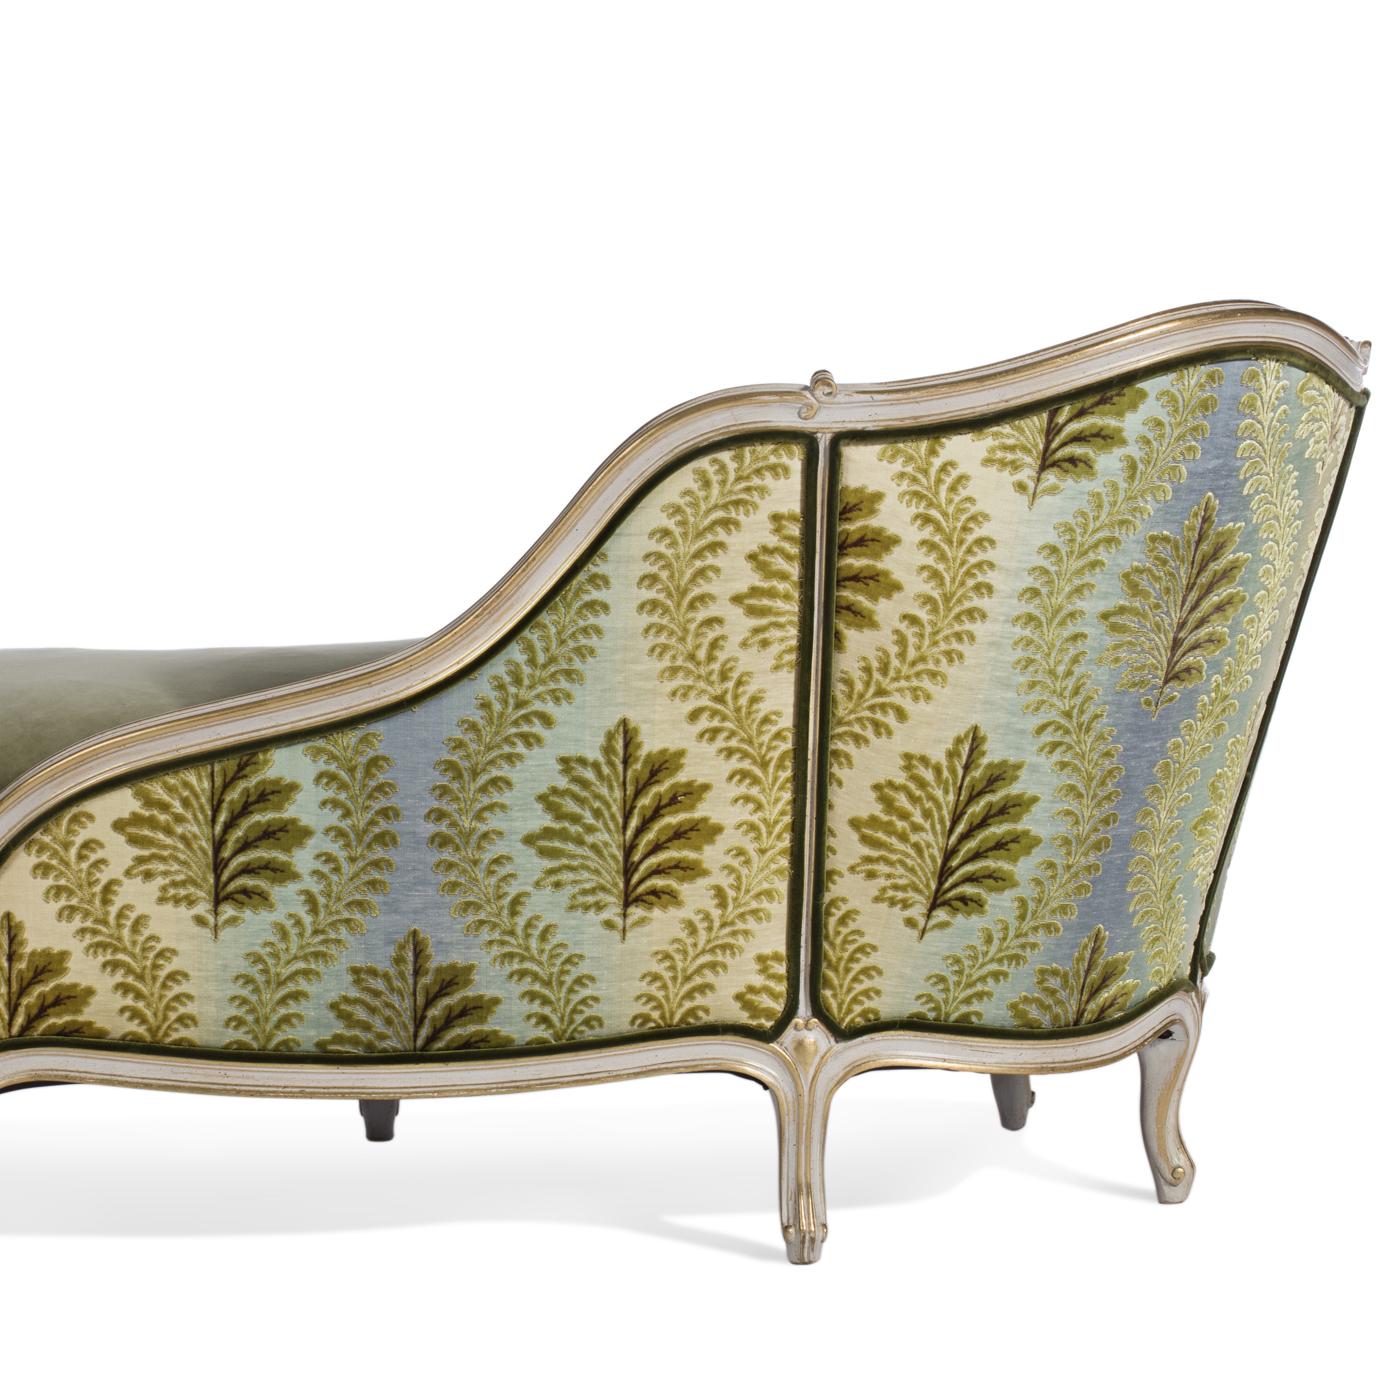 Chaise lounge Louis XV with handmade carvings, upholstered with buttons on the curved back.